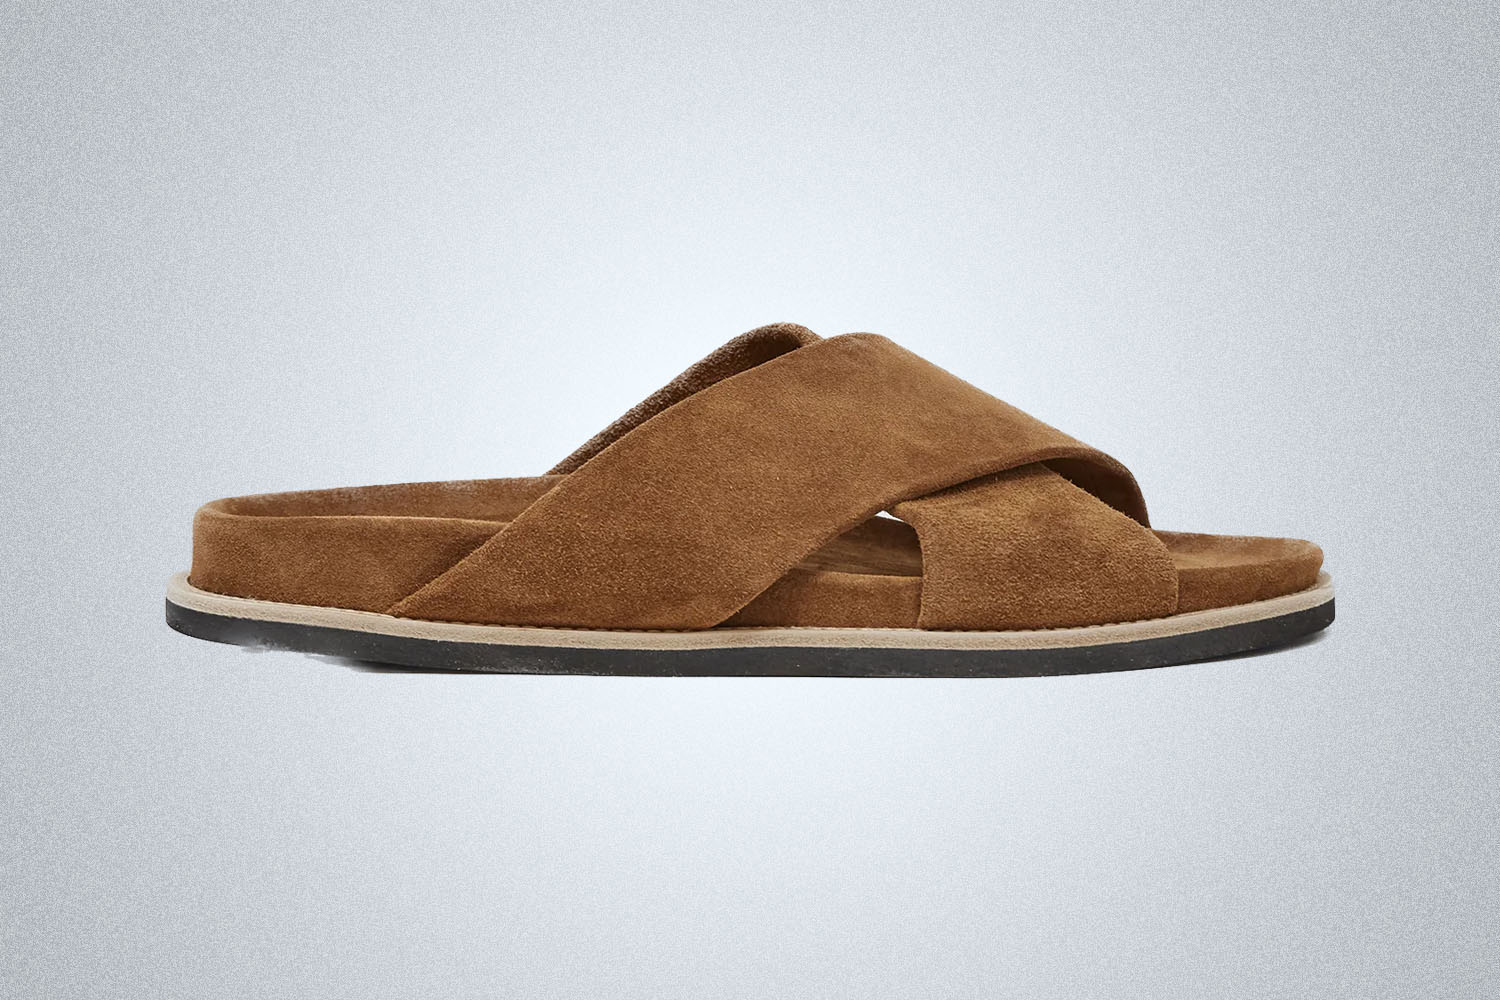 The "Quiet Luxury" Leather Sandals: Todd Snyder Nomad Suede Crossover Sandal